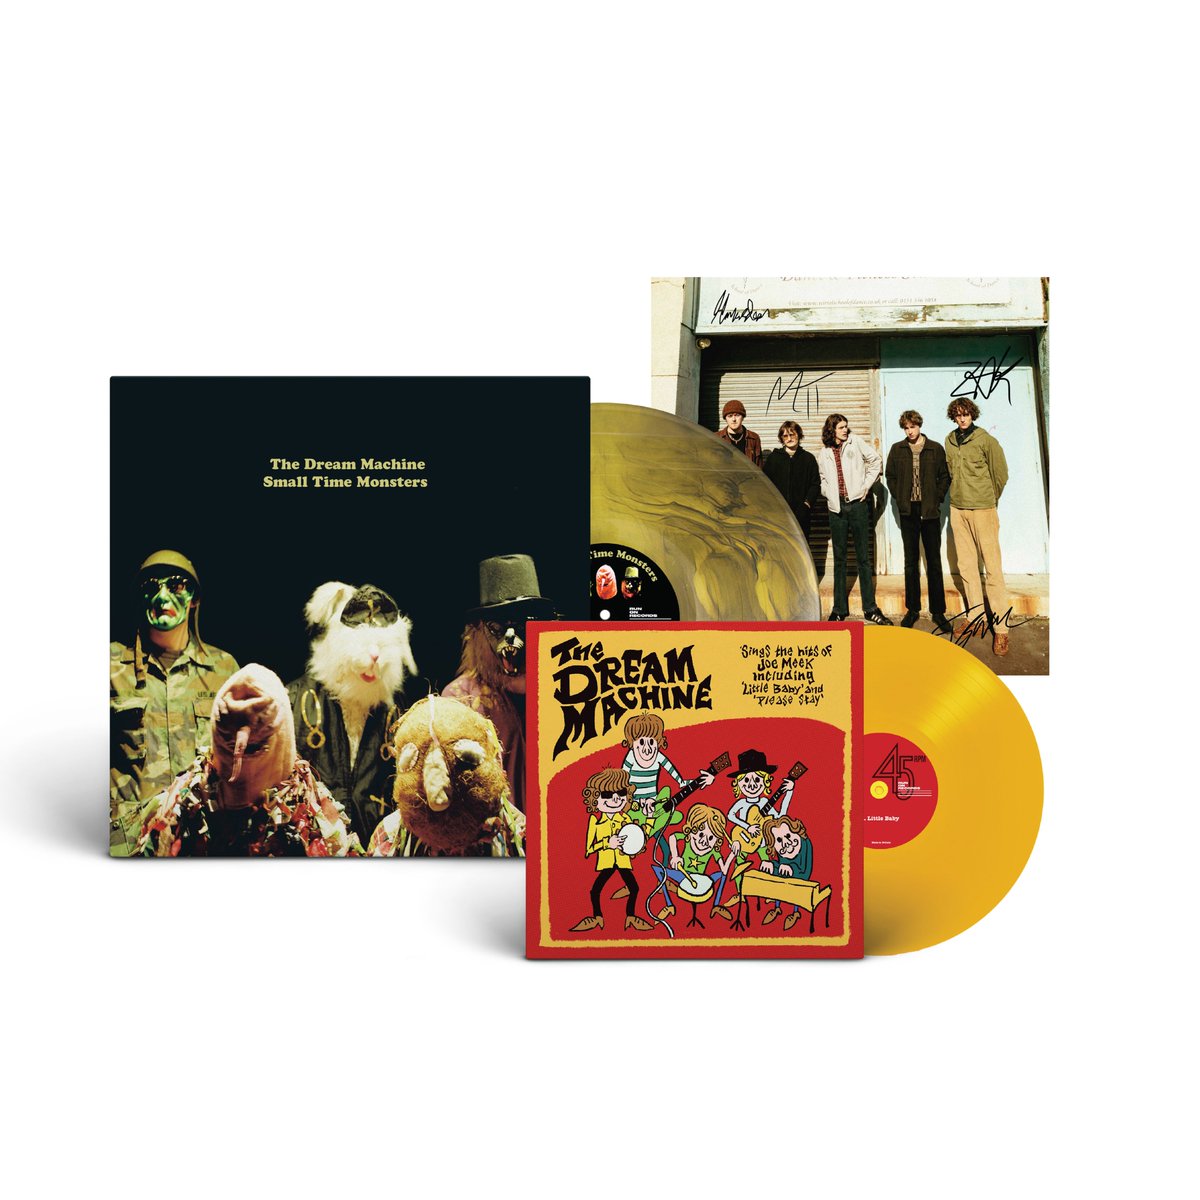 PRESALE: @dinkededition 296 @DreamMachineHQ 'Small Time Monsters' Pre-Order: piccadillyrecords.com/155166/The-Dre… Dinked Vinyl Edition Details: • 'Yellow Magick' coloured vinyl. • Bonus 'Colonel Mustard' coloured 7'. • Signed photo print. • Numbered edition of 500. @ModernSkyUK